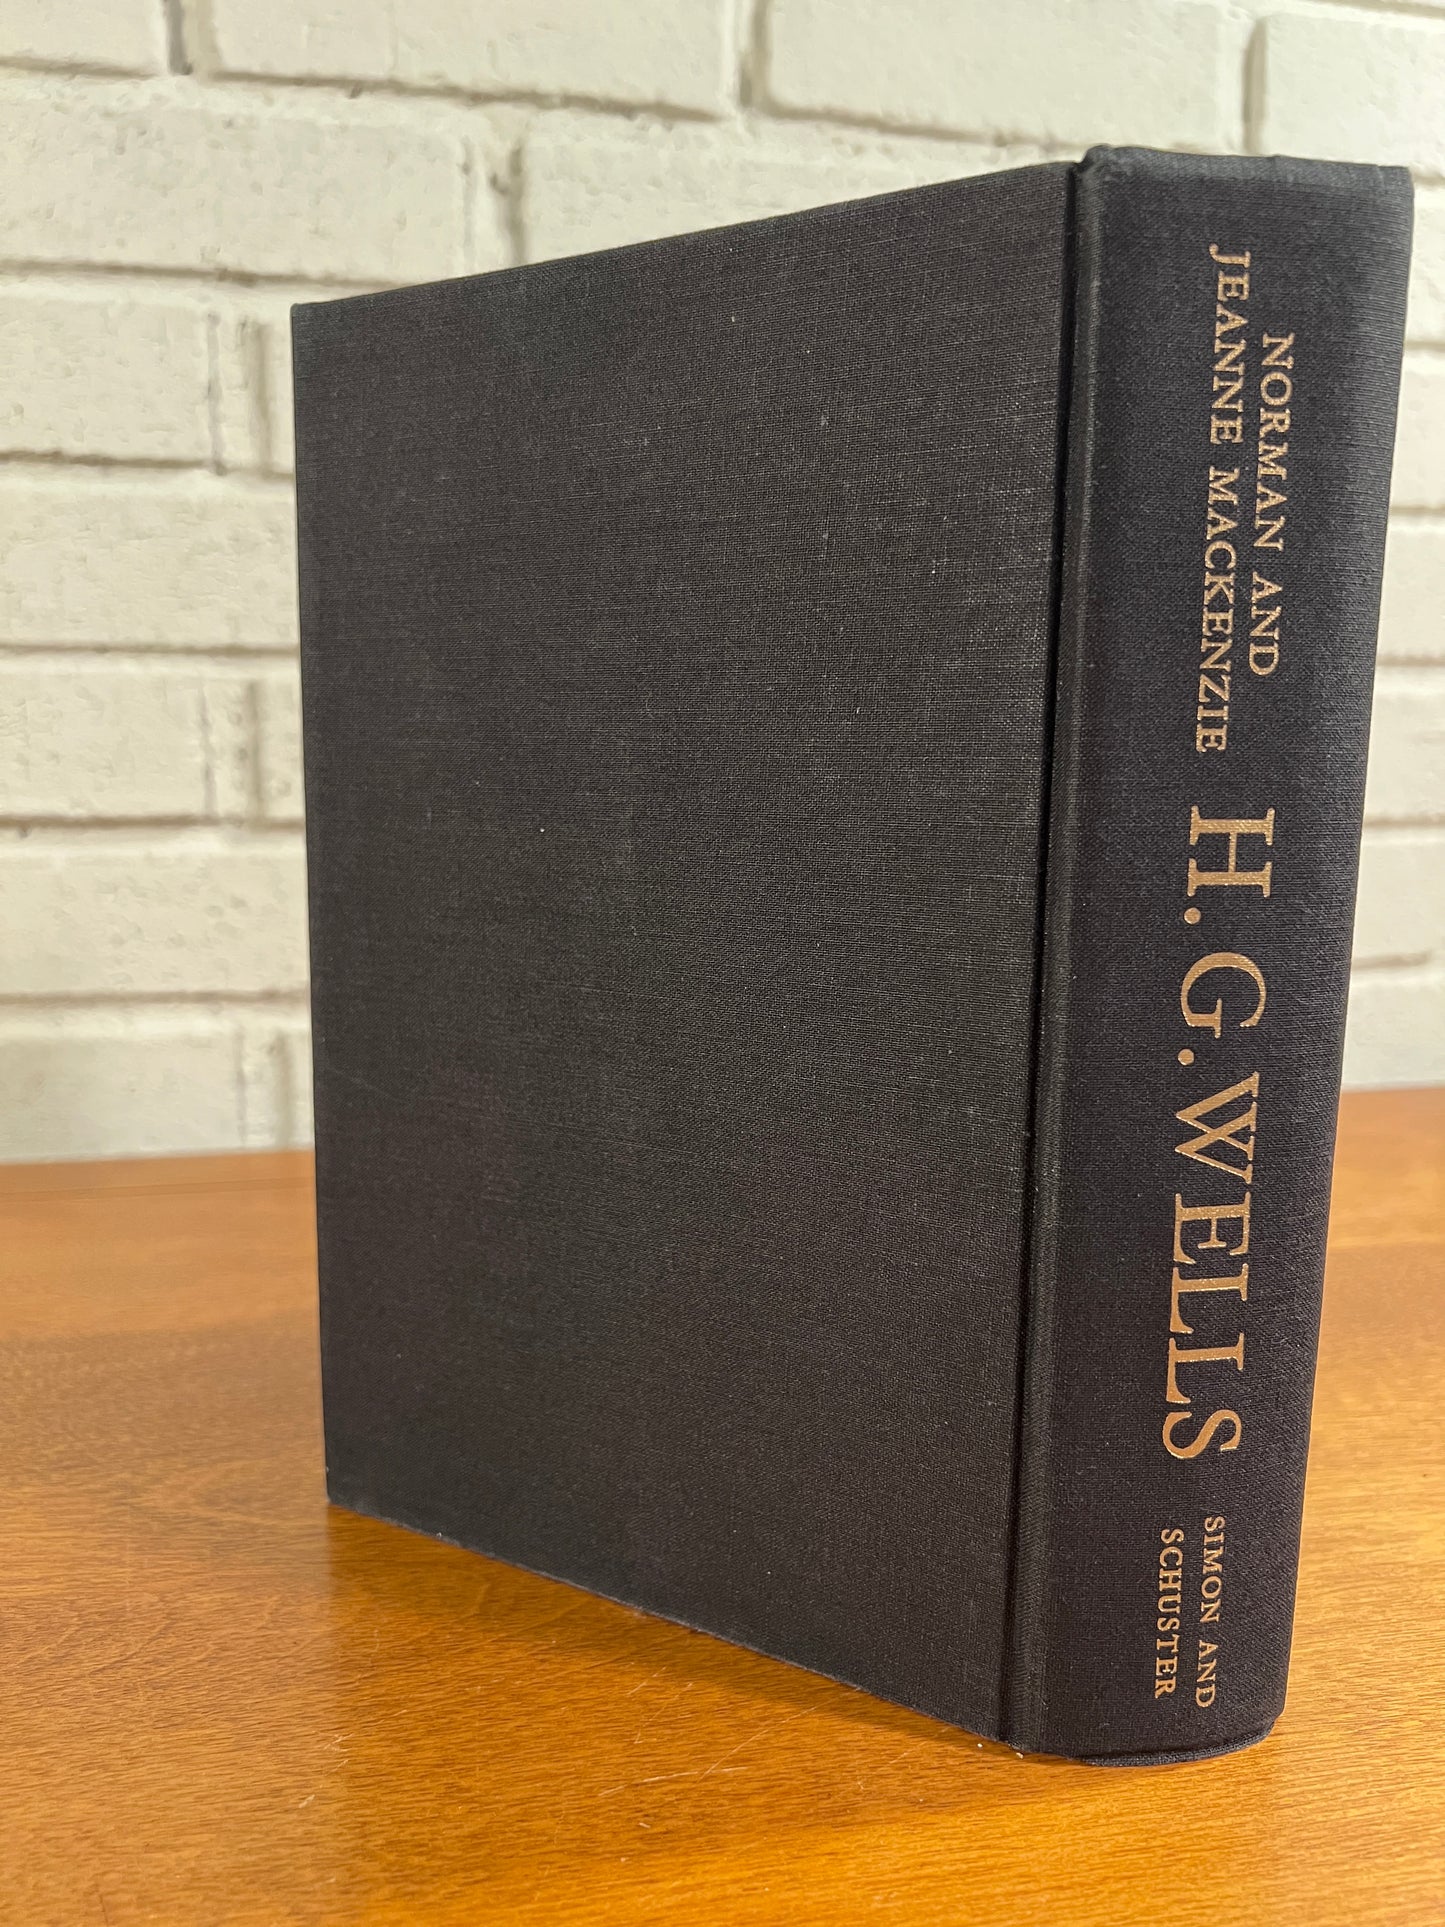 H.G. Wells: A Biography by Norman & Jeanne MacKenzie